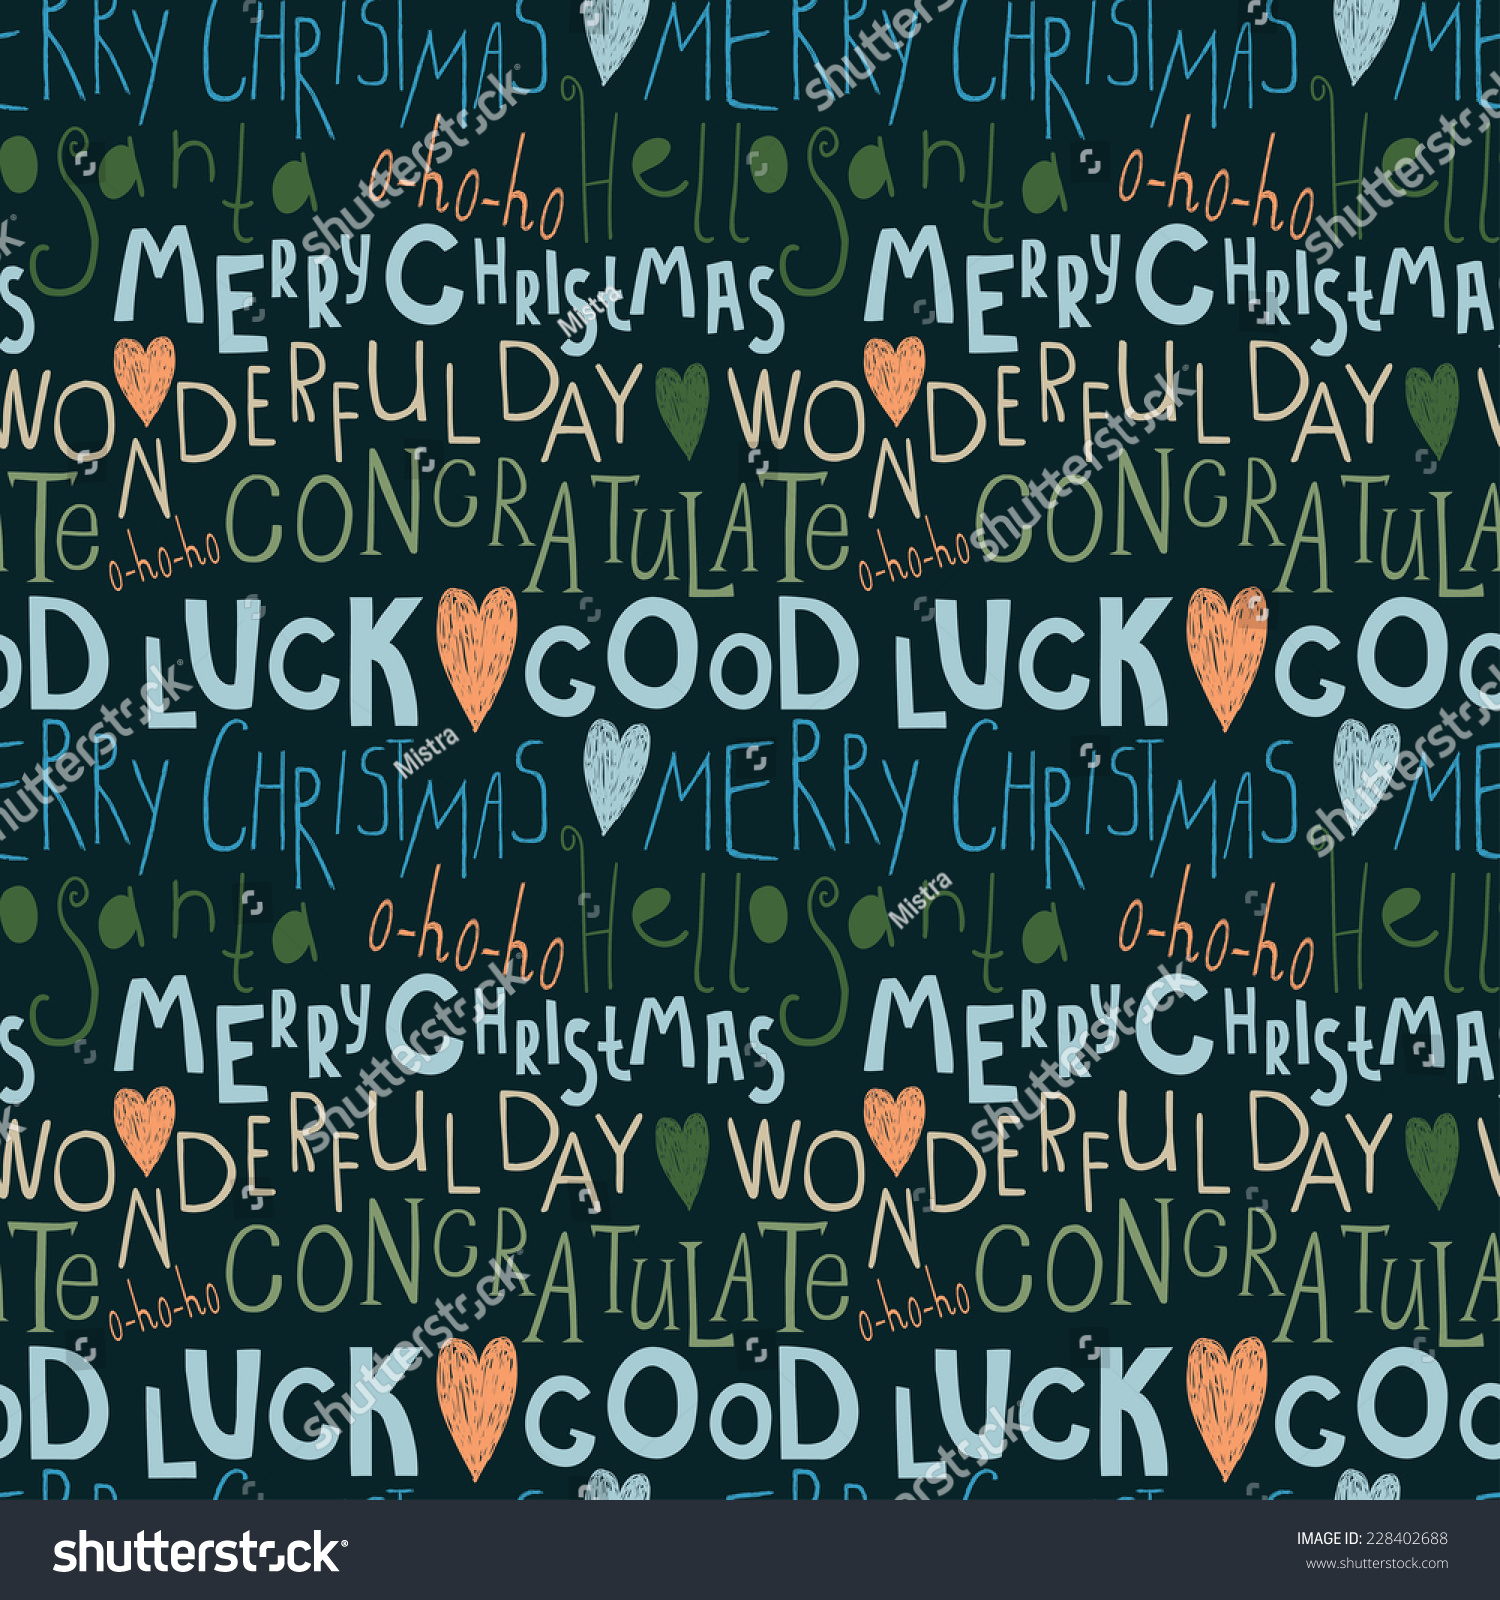 Christmas card with words of wishes and congratulates